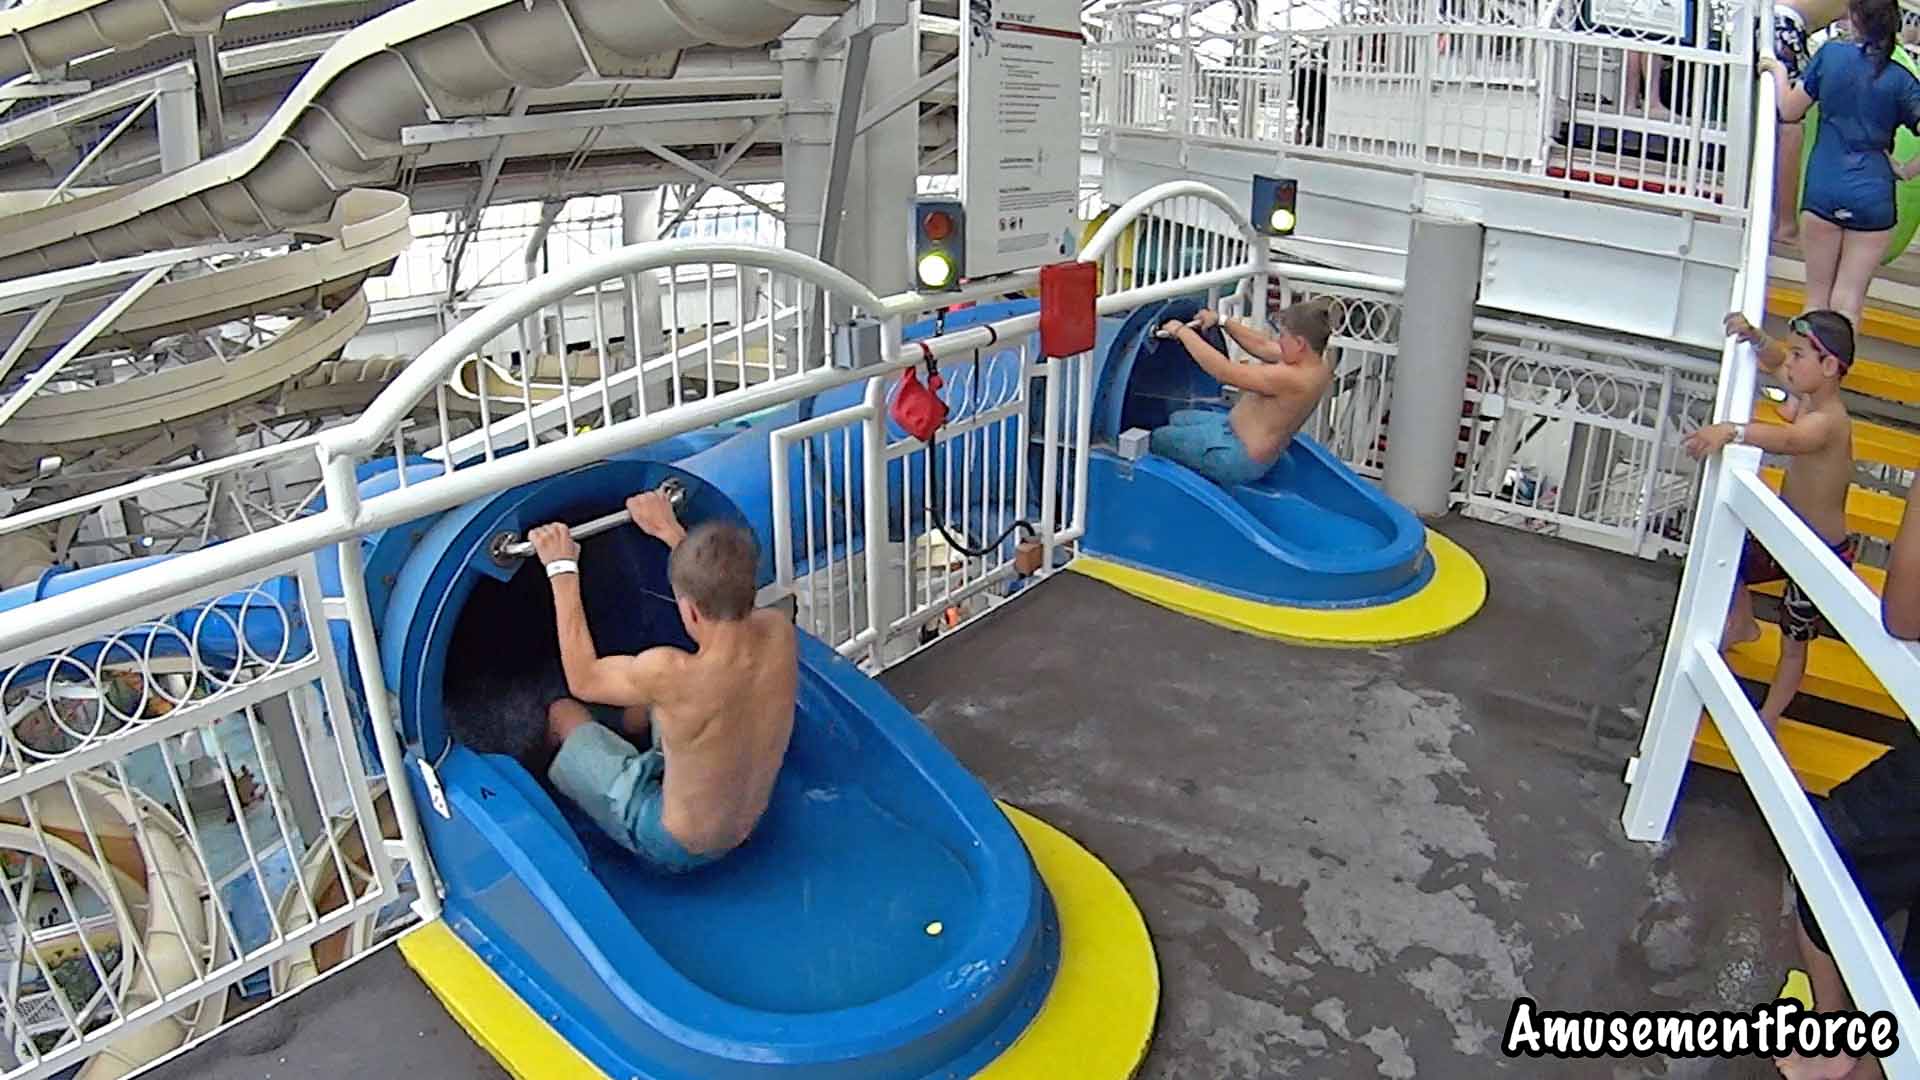 World Waterpark At West Edmonton Mall In Edmonton Alberta Canada Rides Videos Pictures And Review